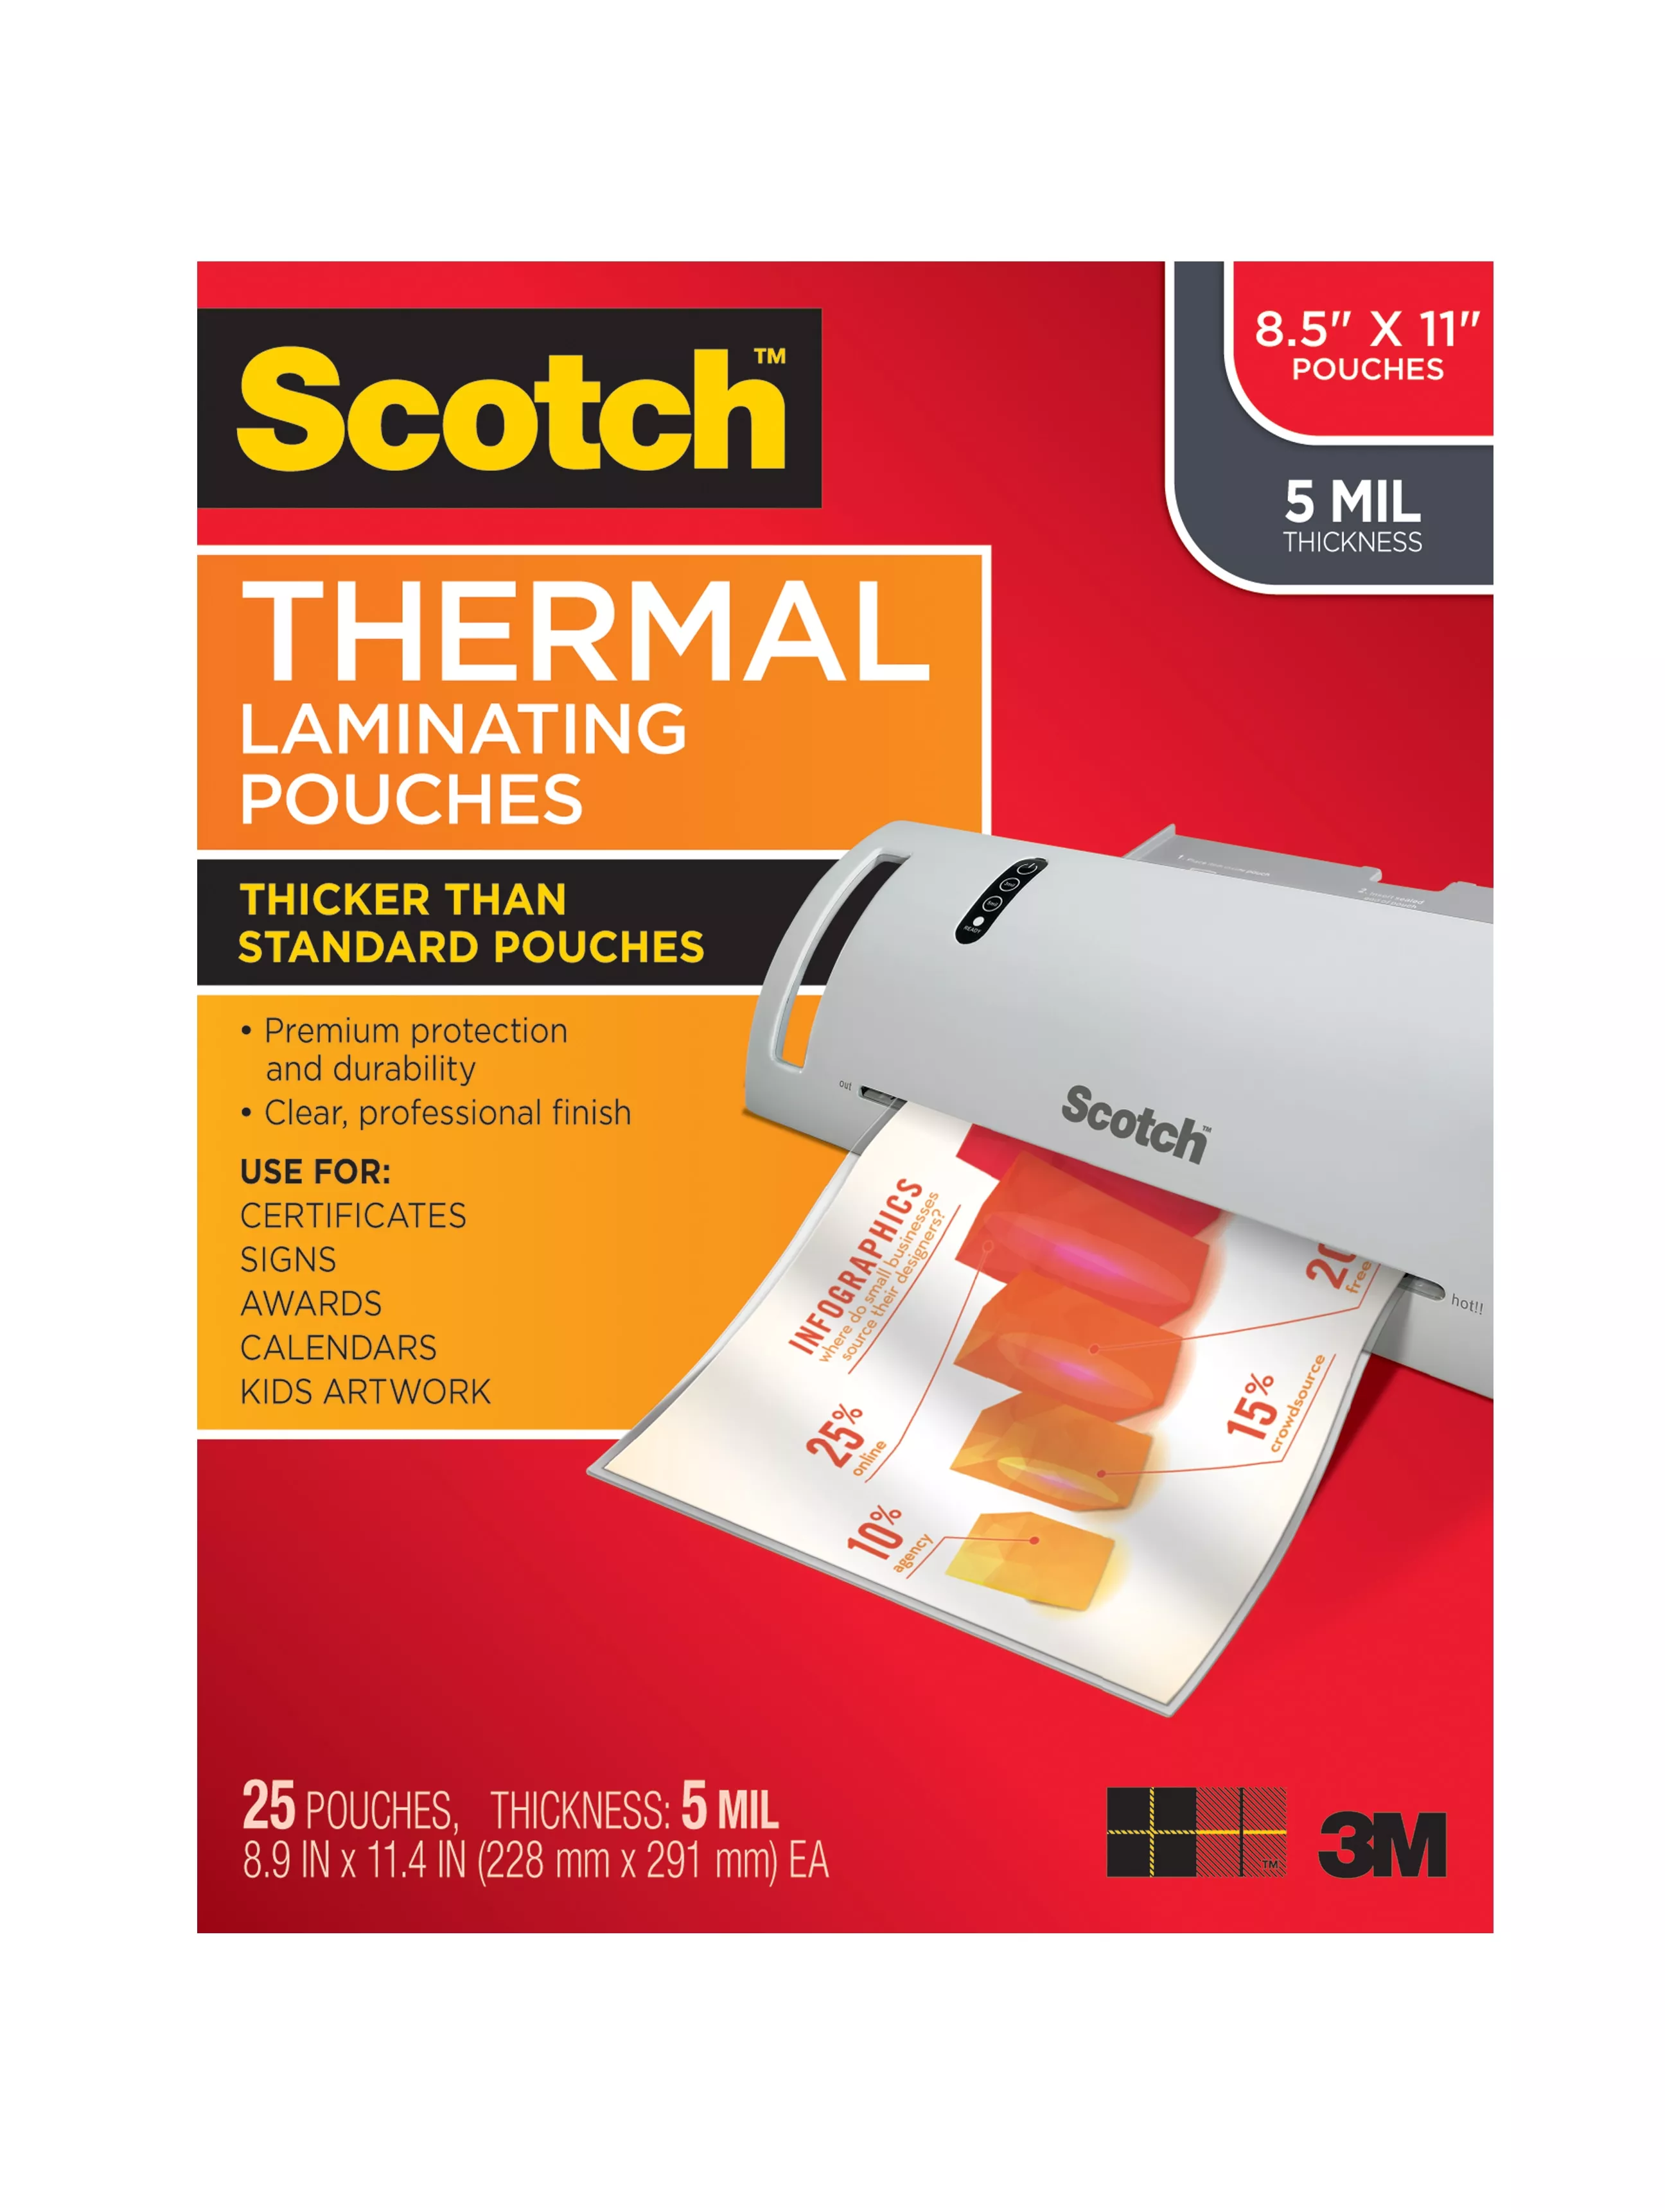 Scotch™ Thermal Pouches TP5854-25, 8.9 in x 11.4 in (228 mm x 291 mm),
Letter Size 5 mil